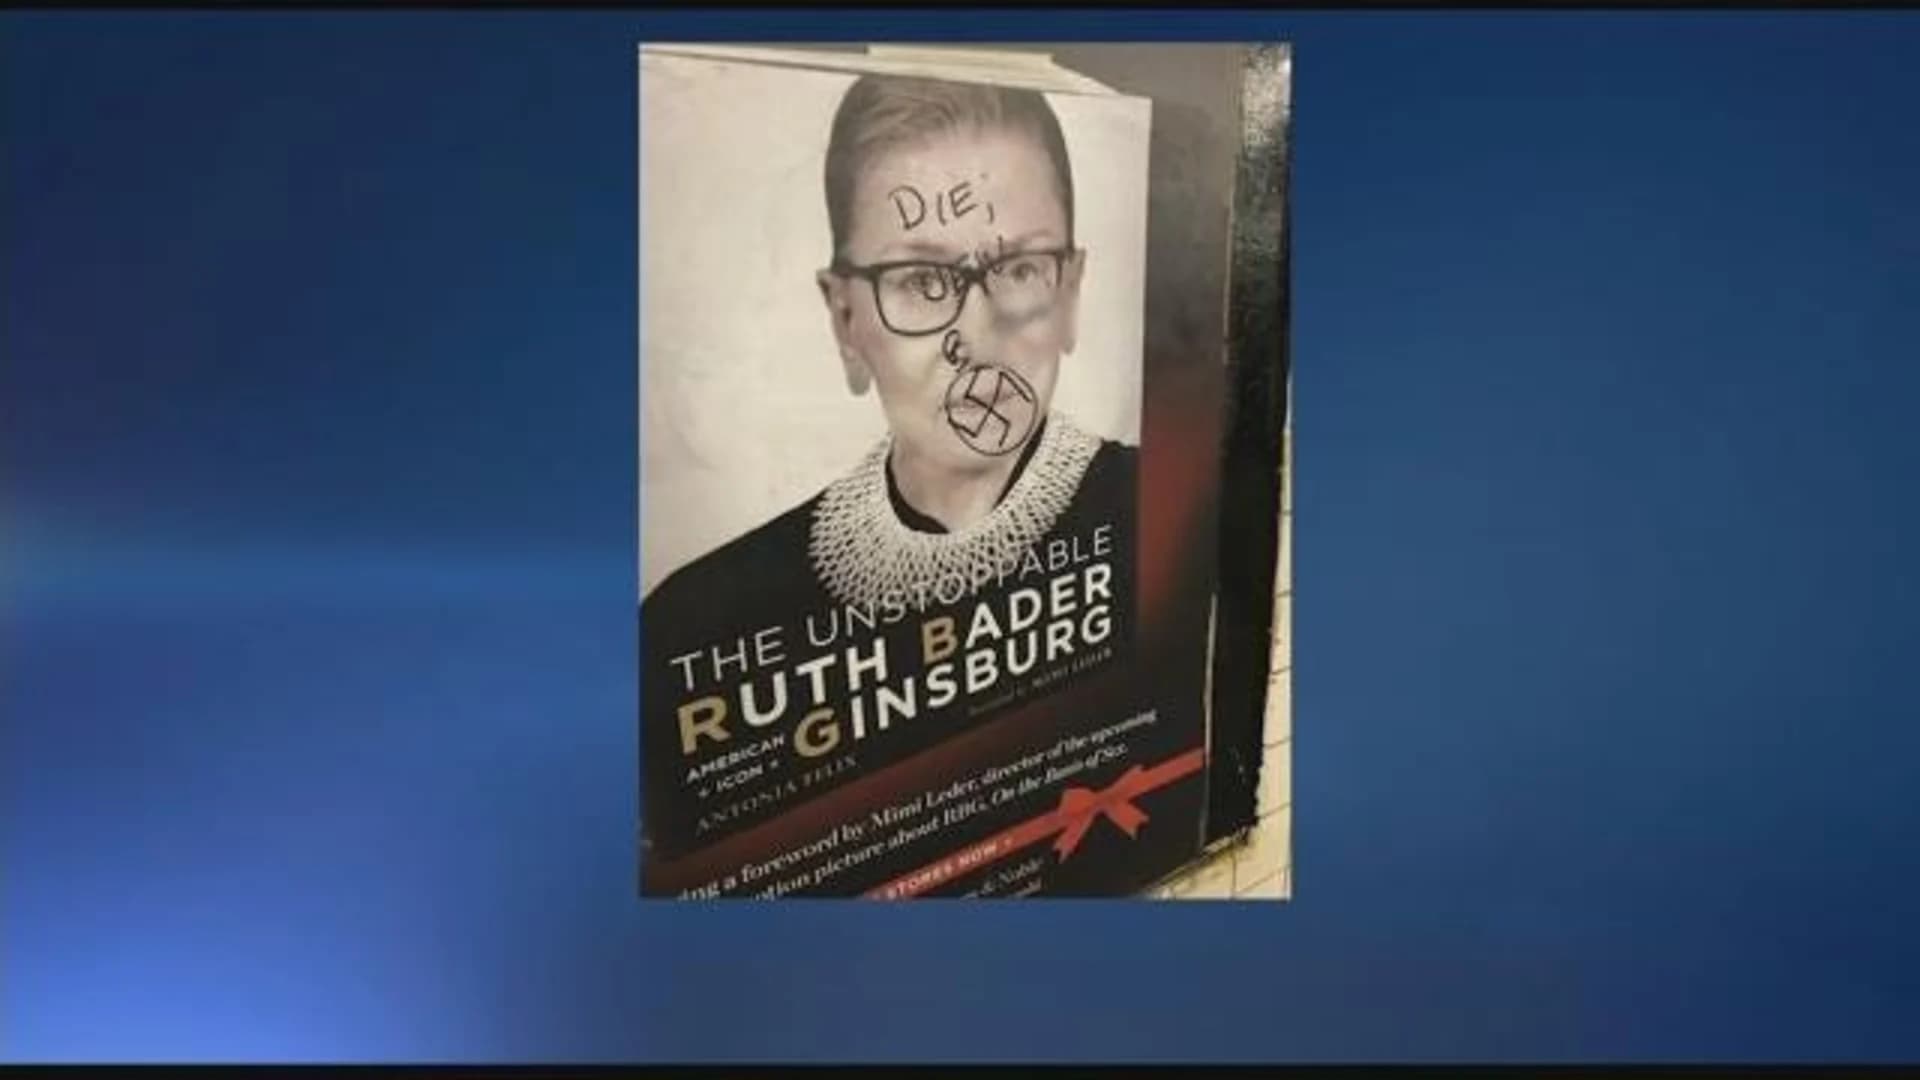 Subway poster of Justice Ruth Bader Ginsburg defaced with hateful graffiti